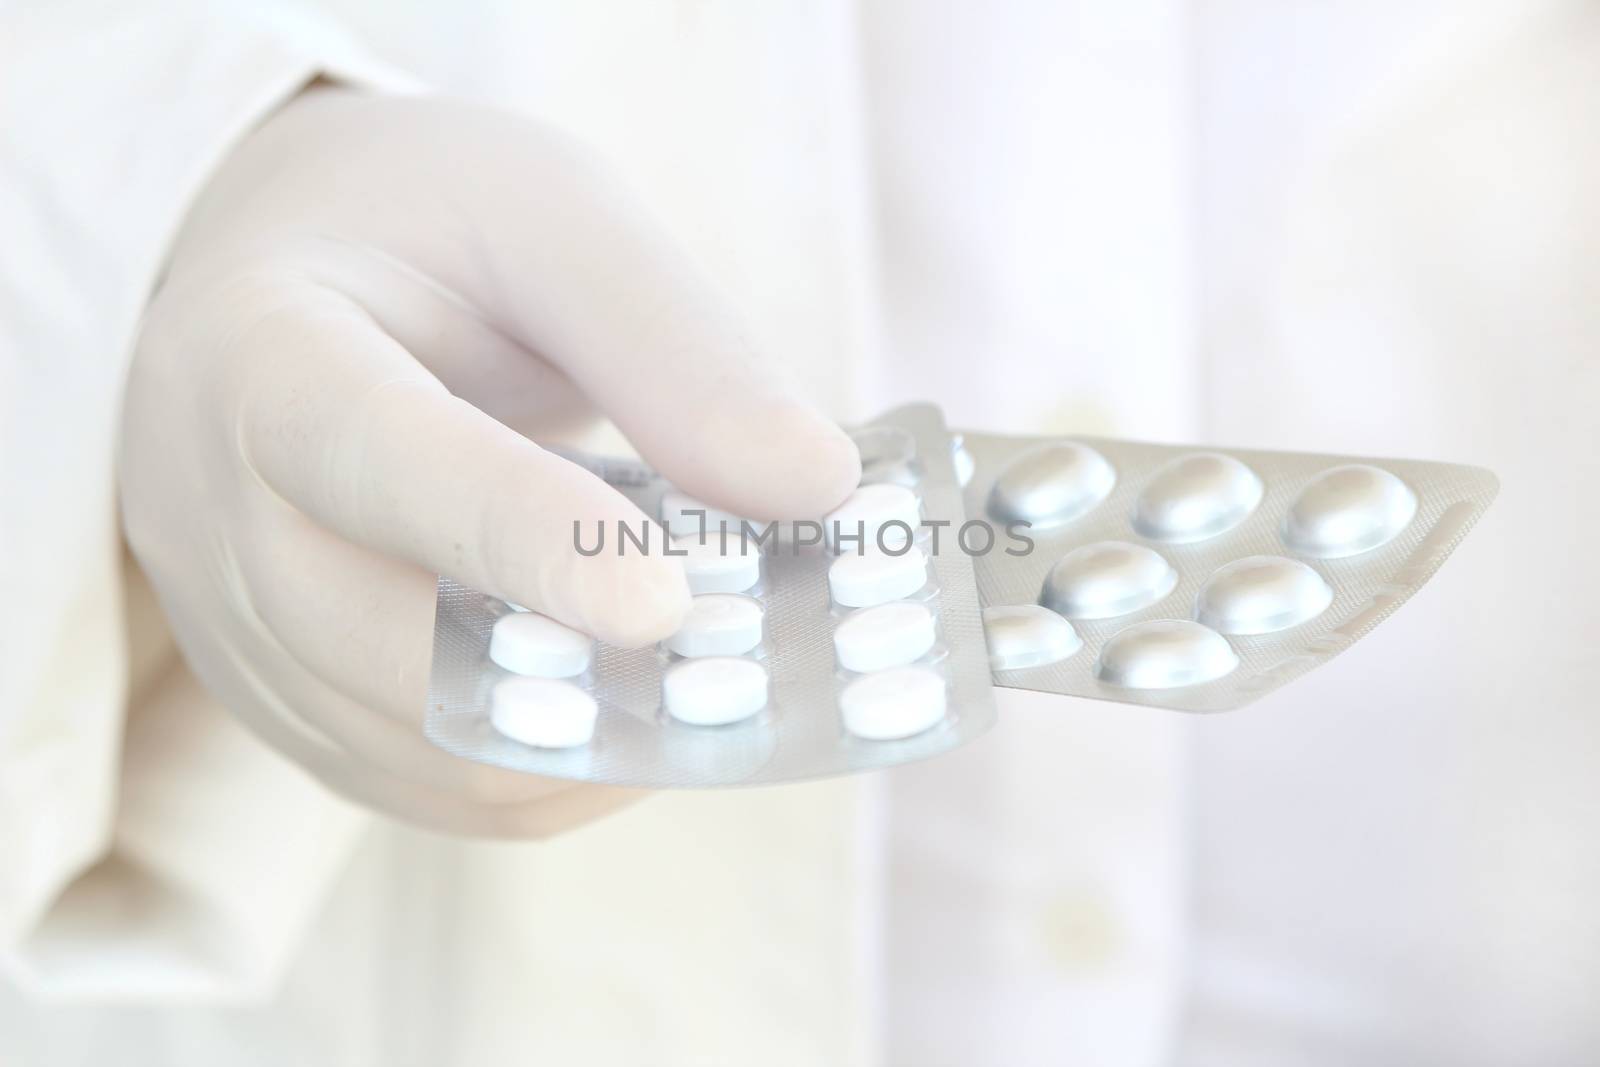 Male hand in white surgical glove holding pill blisters